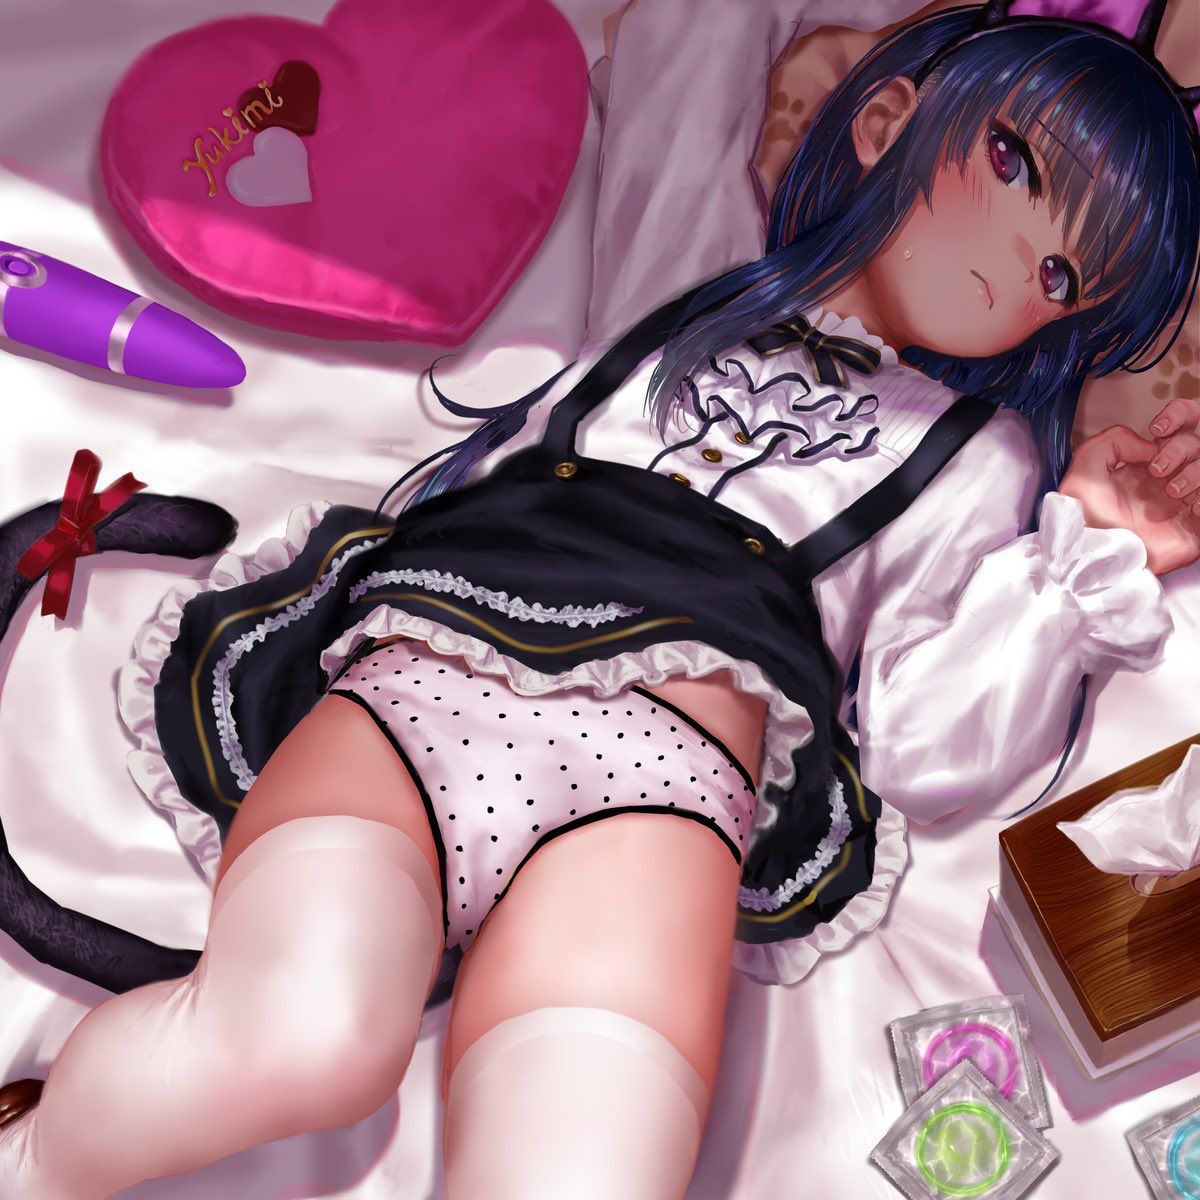 [Lori pants image] Loli pants secondary erotic image to become energetic on the weekend you want to spend looking at the cute pants of the secondary Loli girl 22